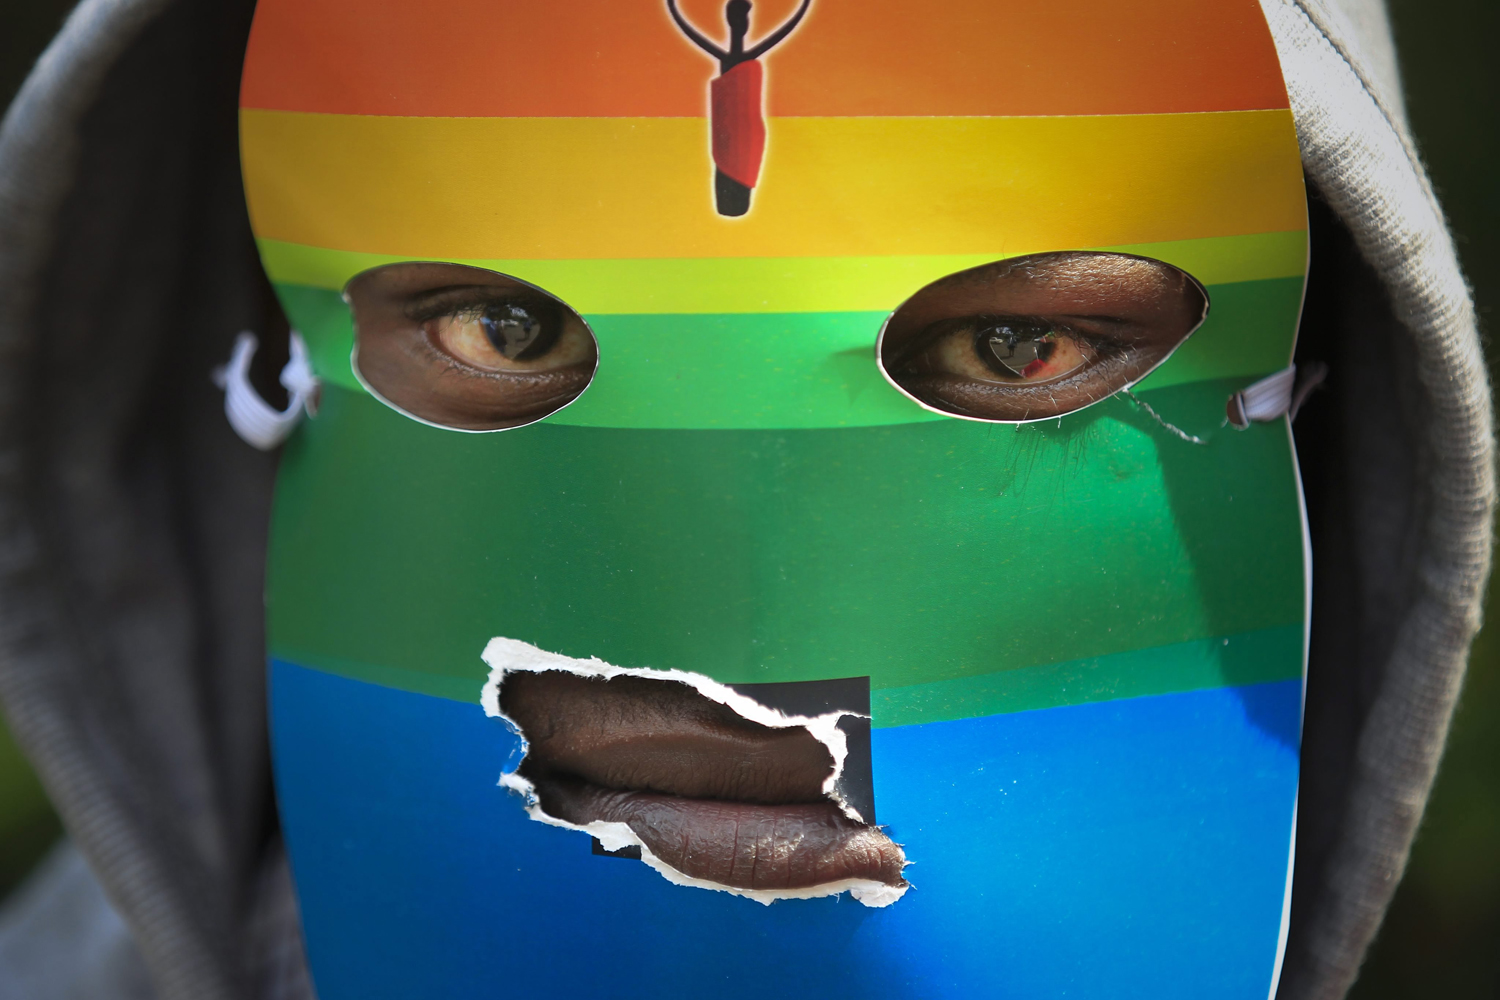 Feb. 10, 2014. A masked Kenyan supporter of the LGBT community joins others during a protest against Uganda's anti-gay bill in front of the Ugandan High Commission in Nairobi, Kenya.